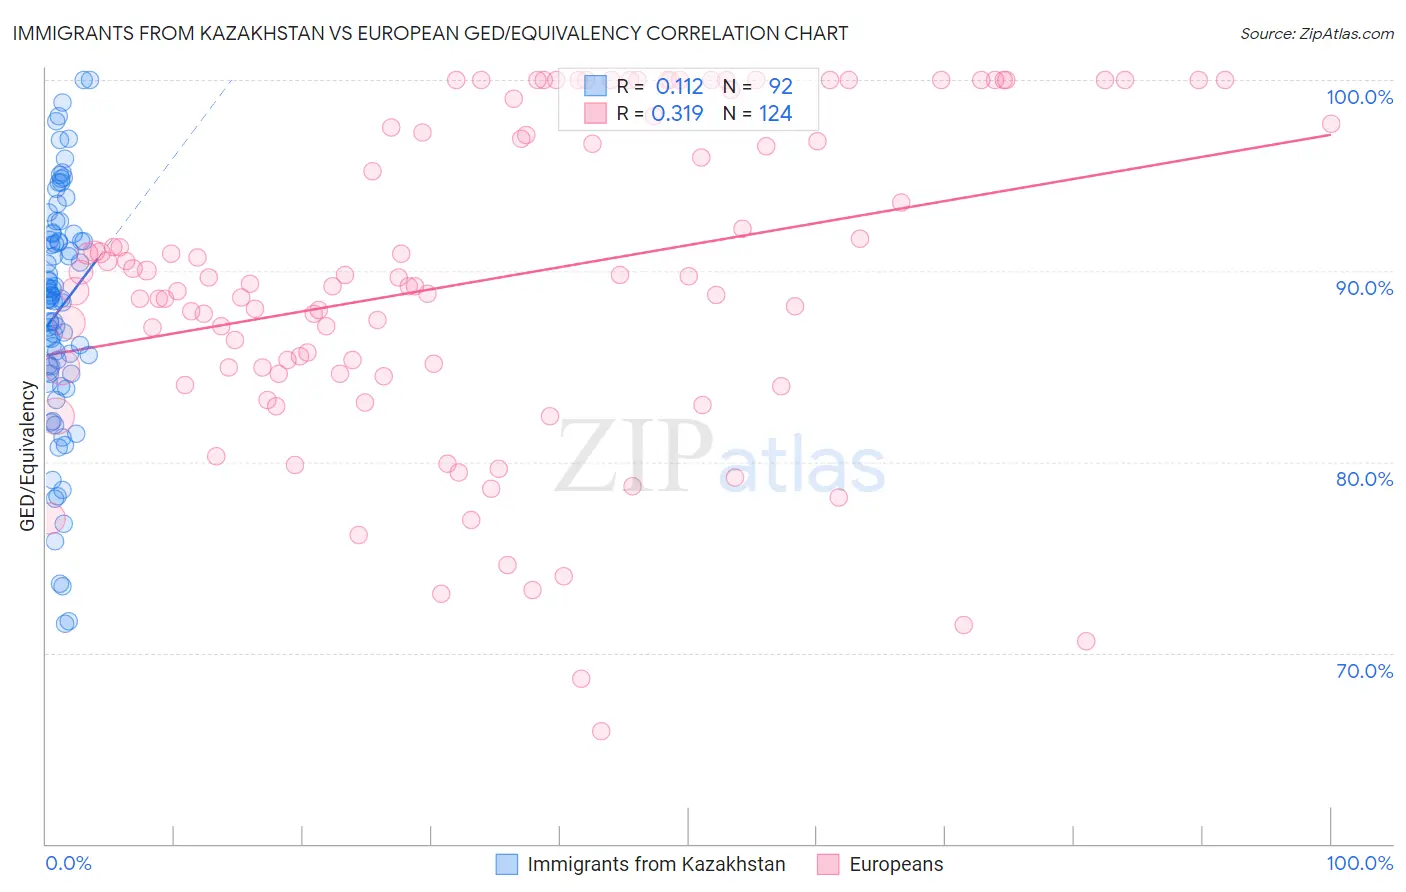 Immigrants from Kazakhstan vs European GED/Equivalency